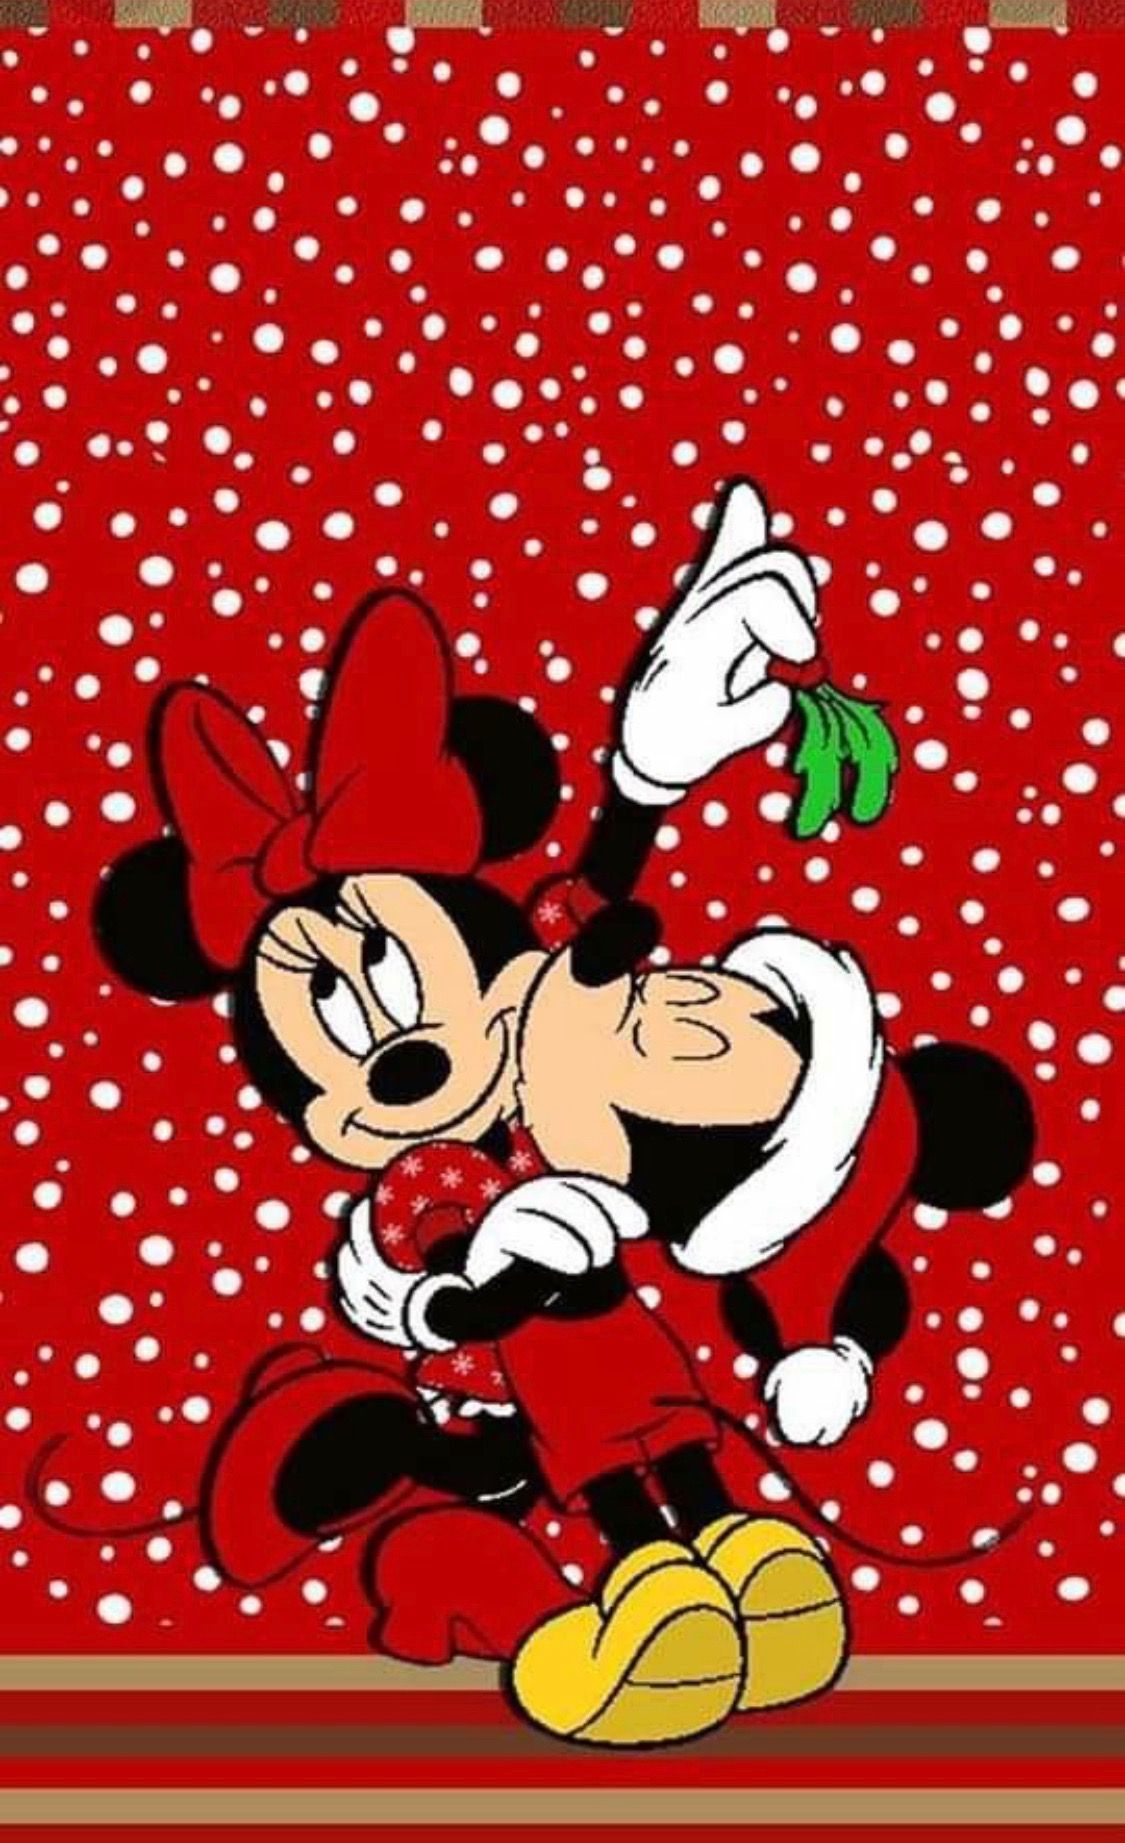 Christmas Mickey and Minnie Wallpaper Free Christmas Mickey and Minnie Background